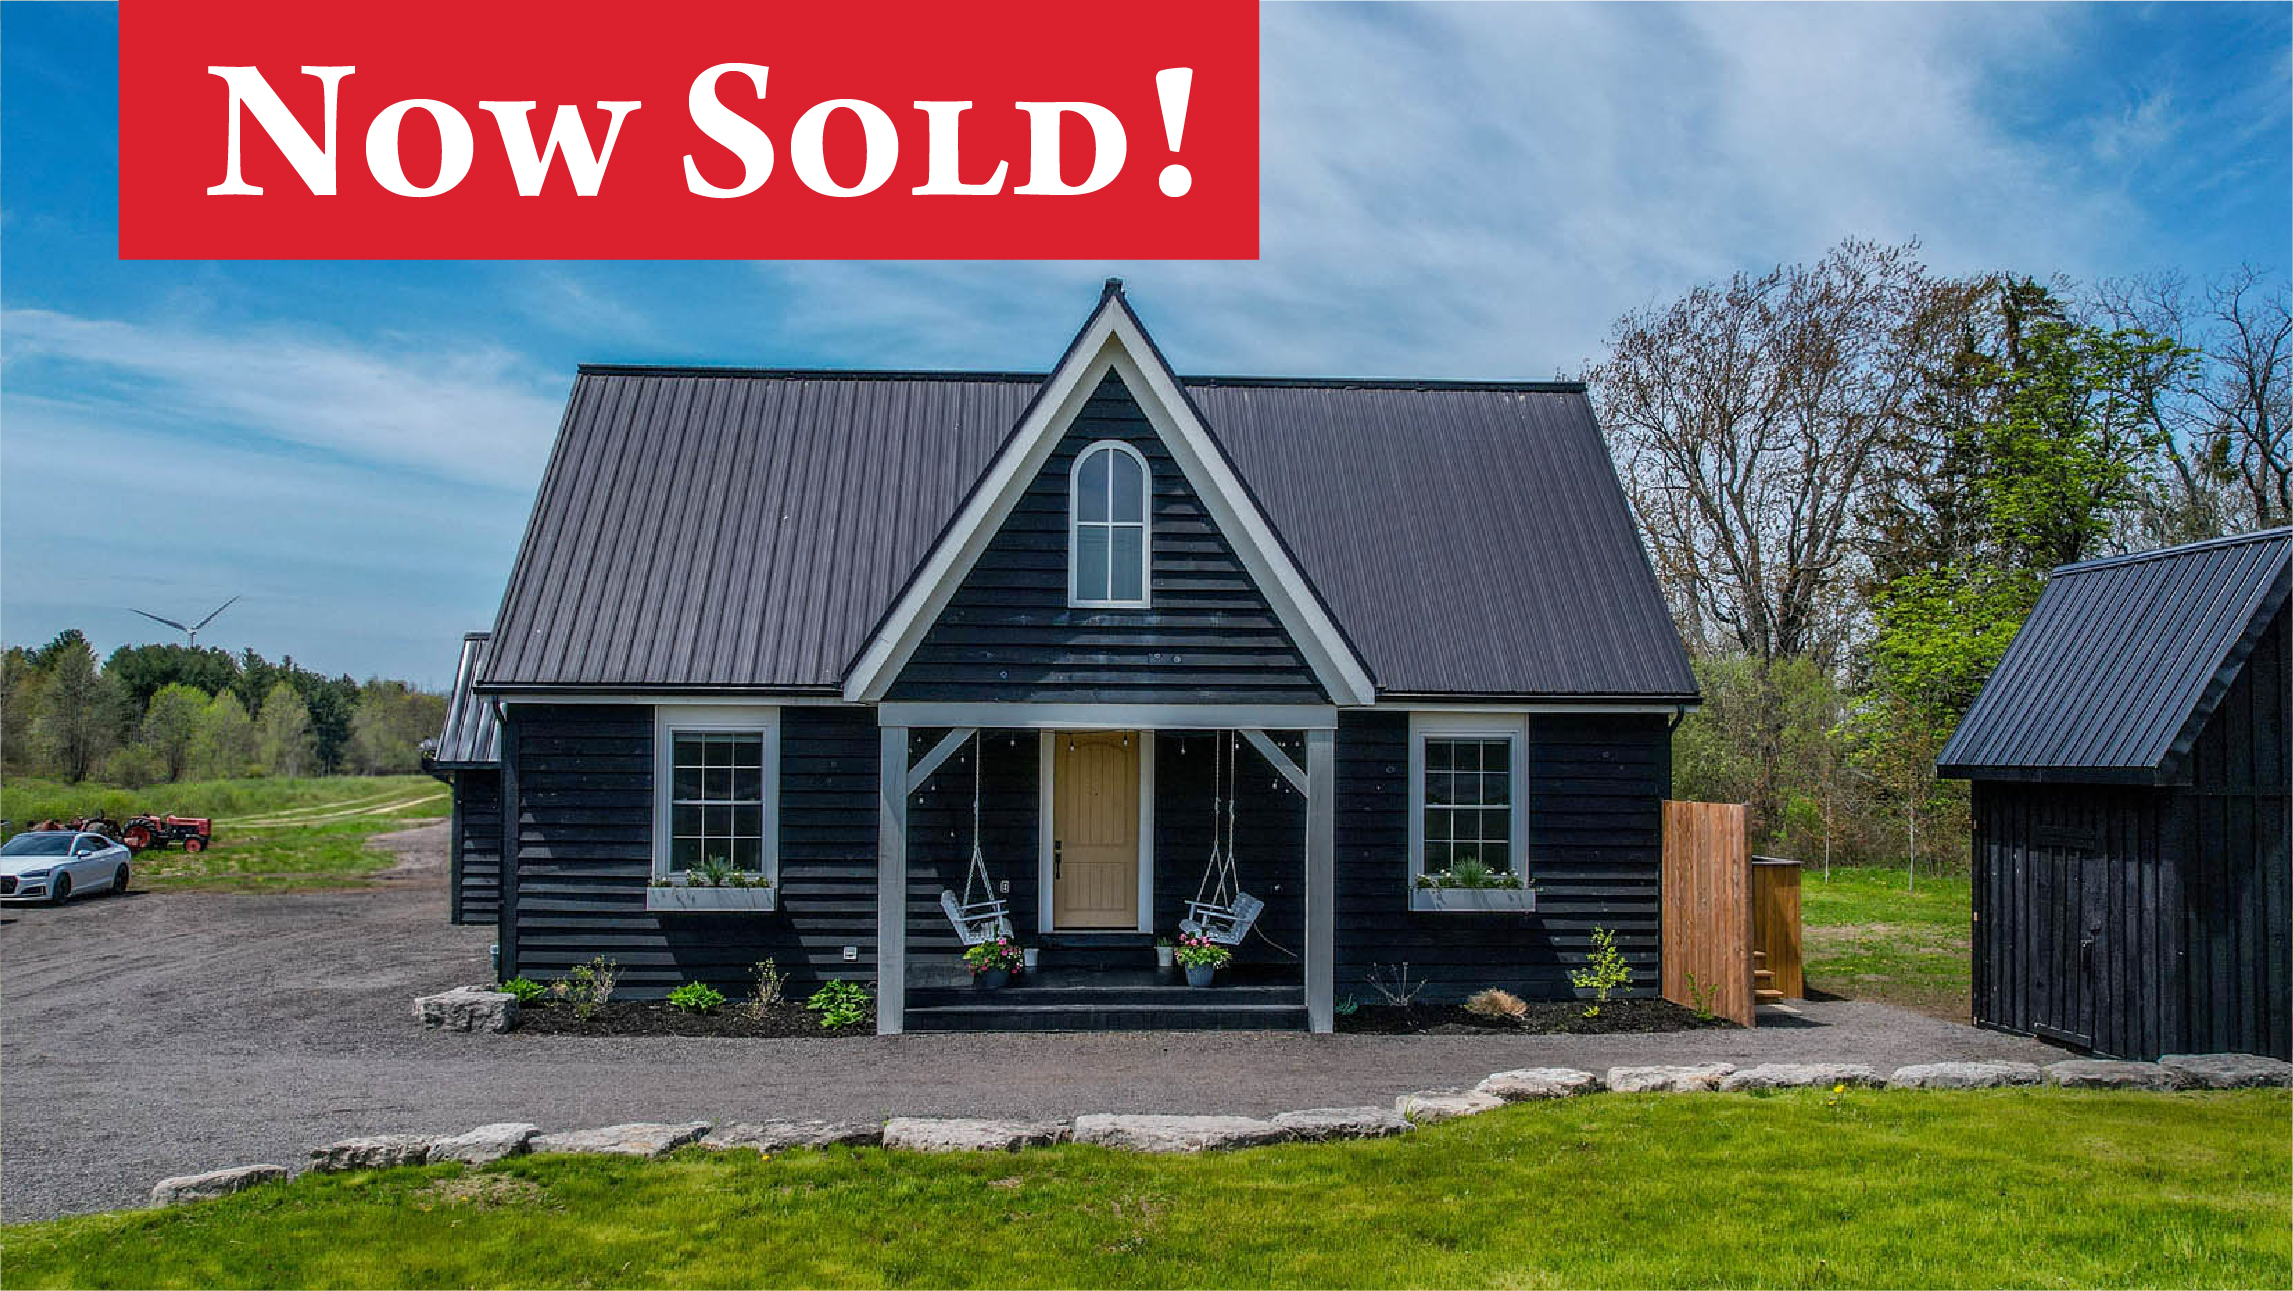 Now Sold banner on 11674 Burnaby Rd in Wainfleet